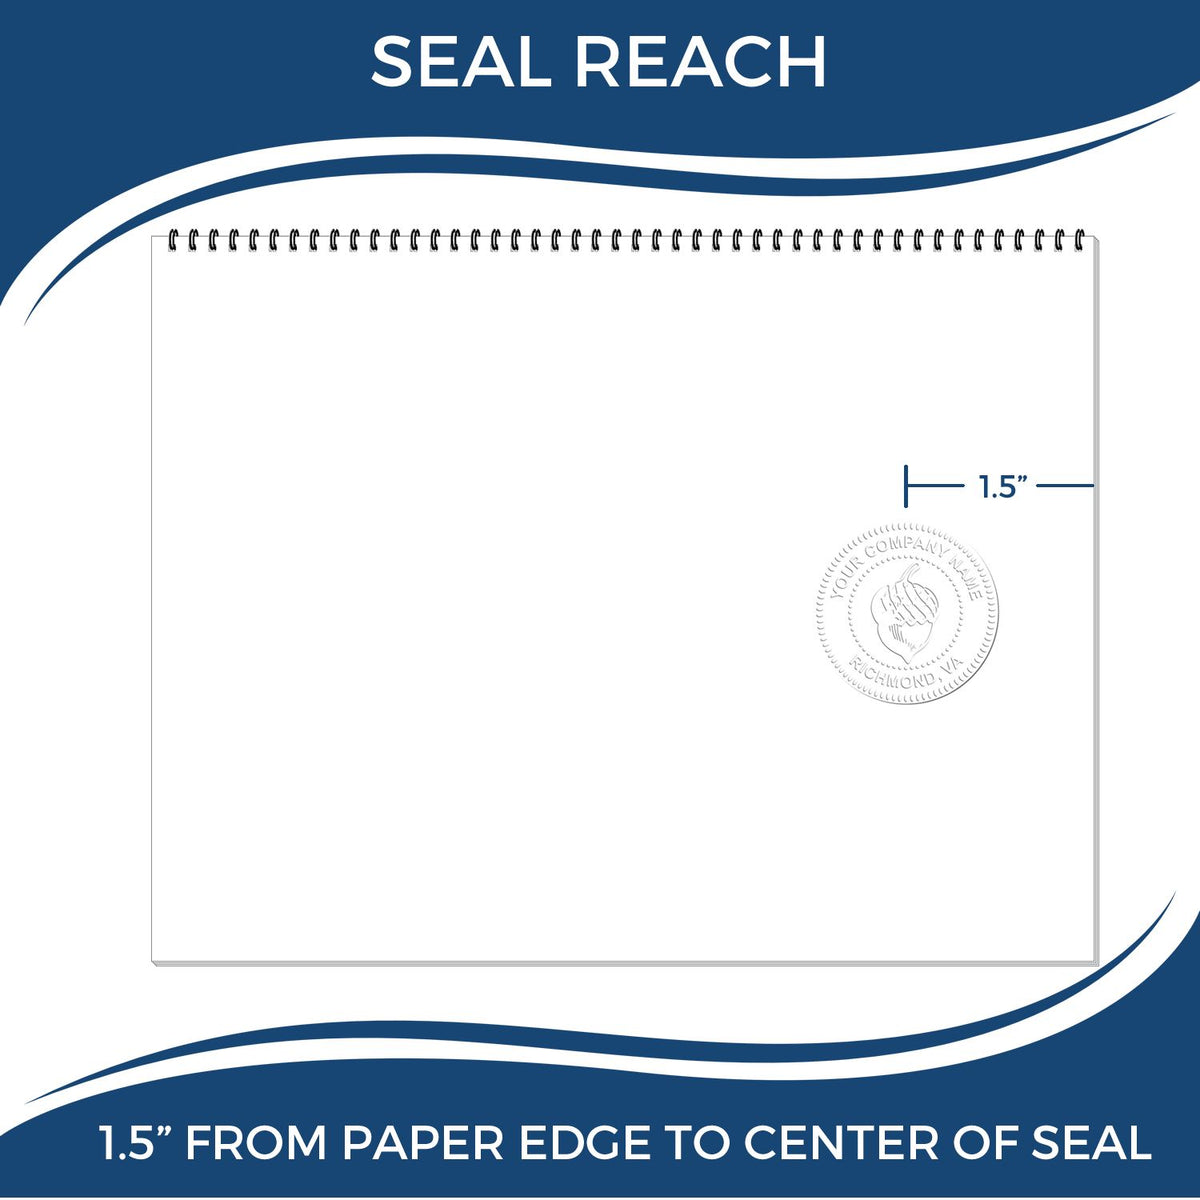 An infographic showing the seal reach which is represented by a ruler and a miniature seal image of the Gift Missouri Land Surveyor Seal